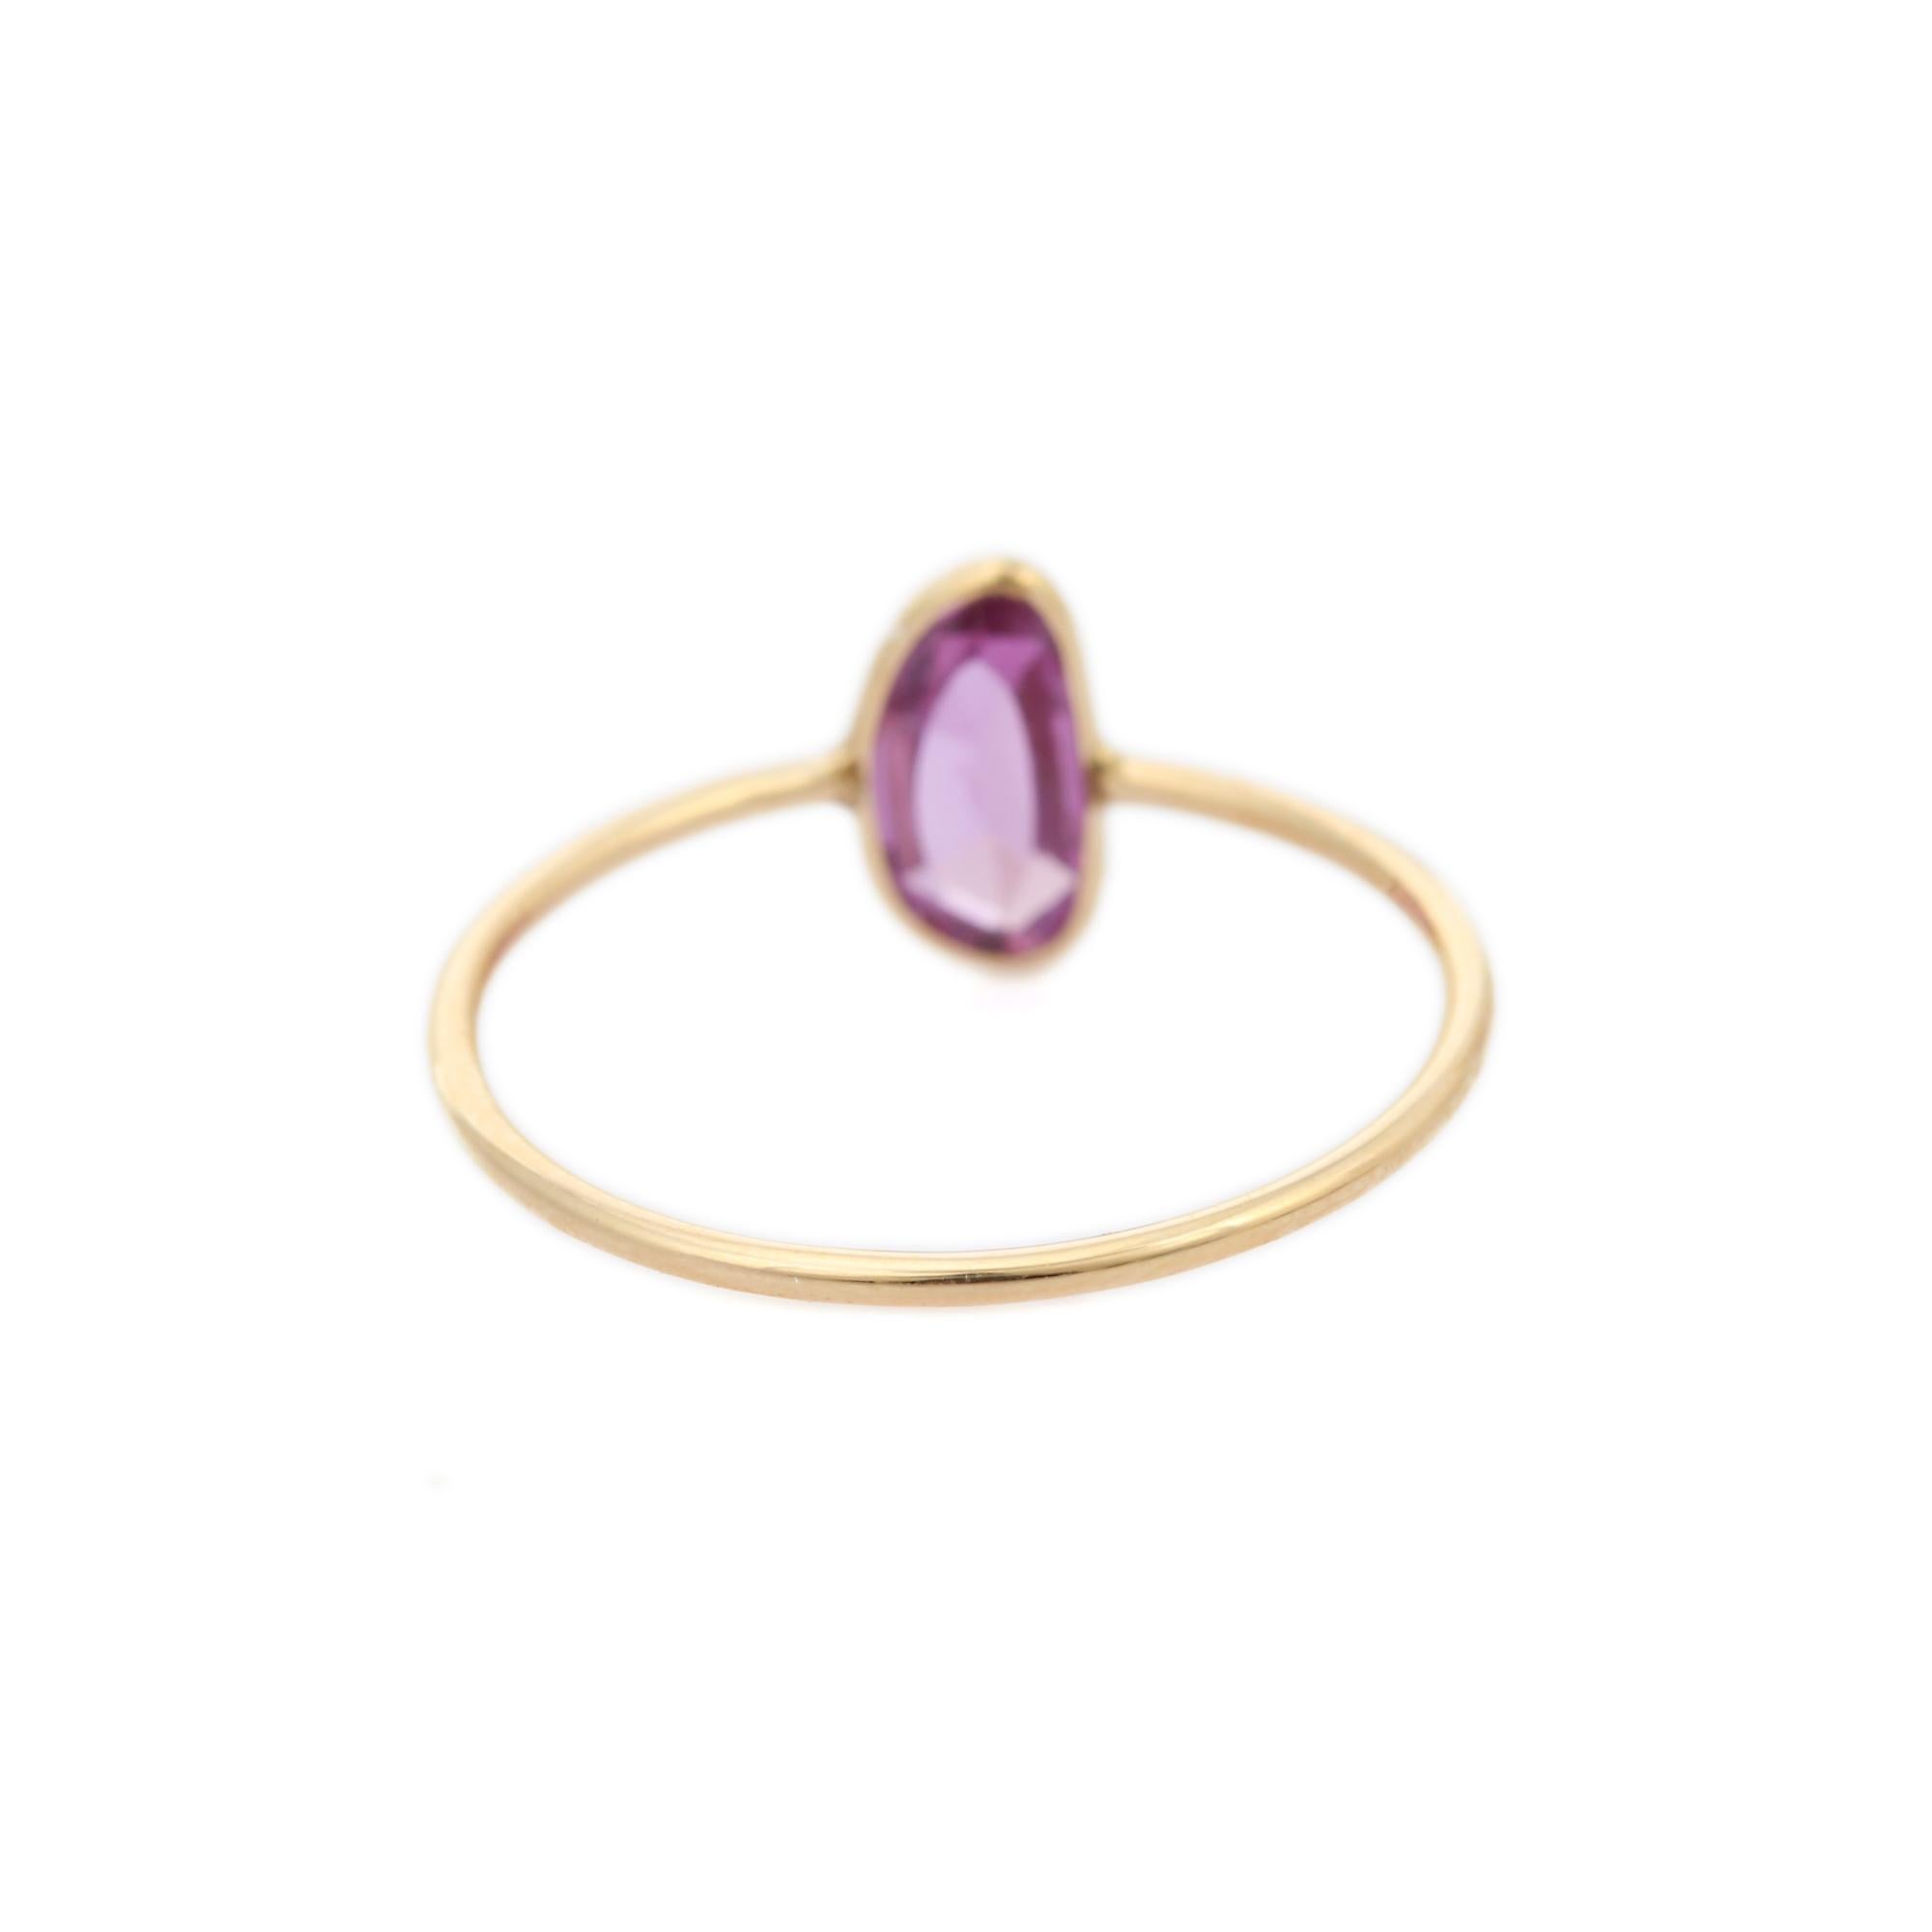 For Sale:  Handcrafted Pink Sapphire Gemstone Single Stone Ring in 14 Karat Yellow Gold 4